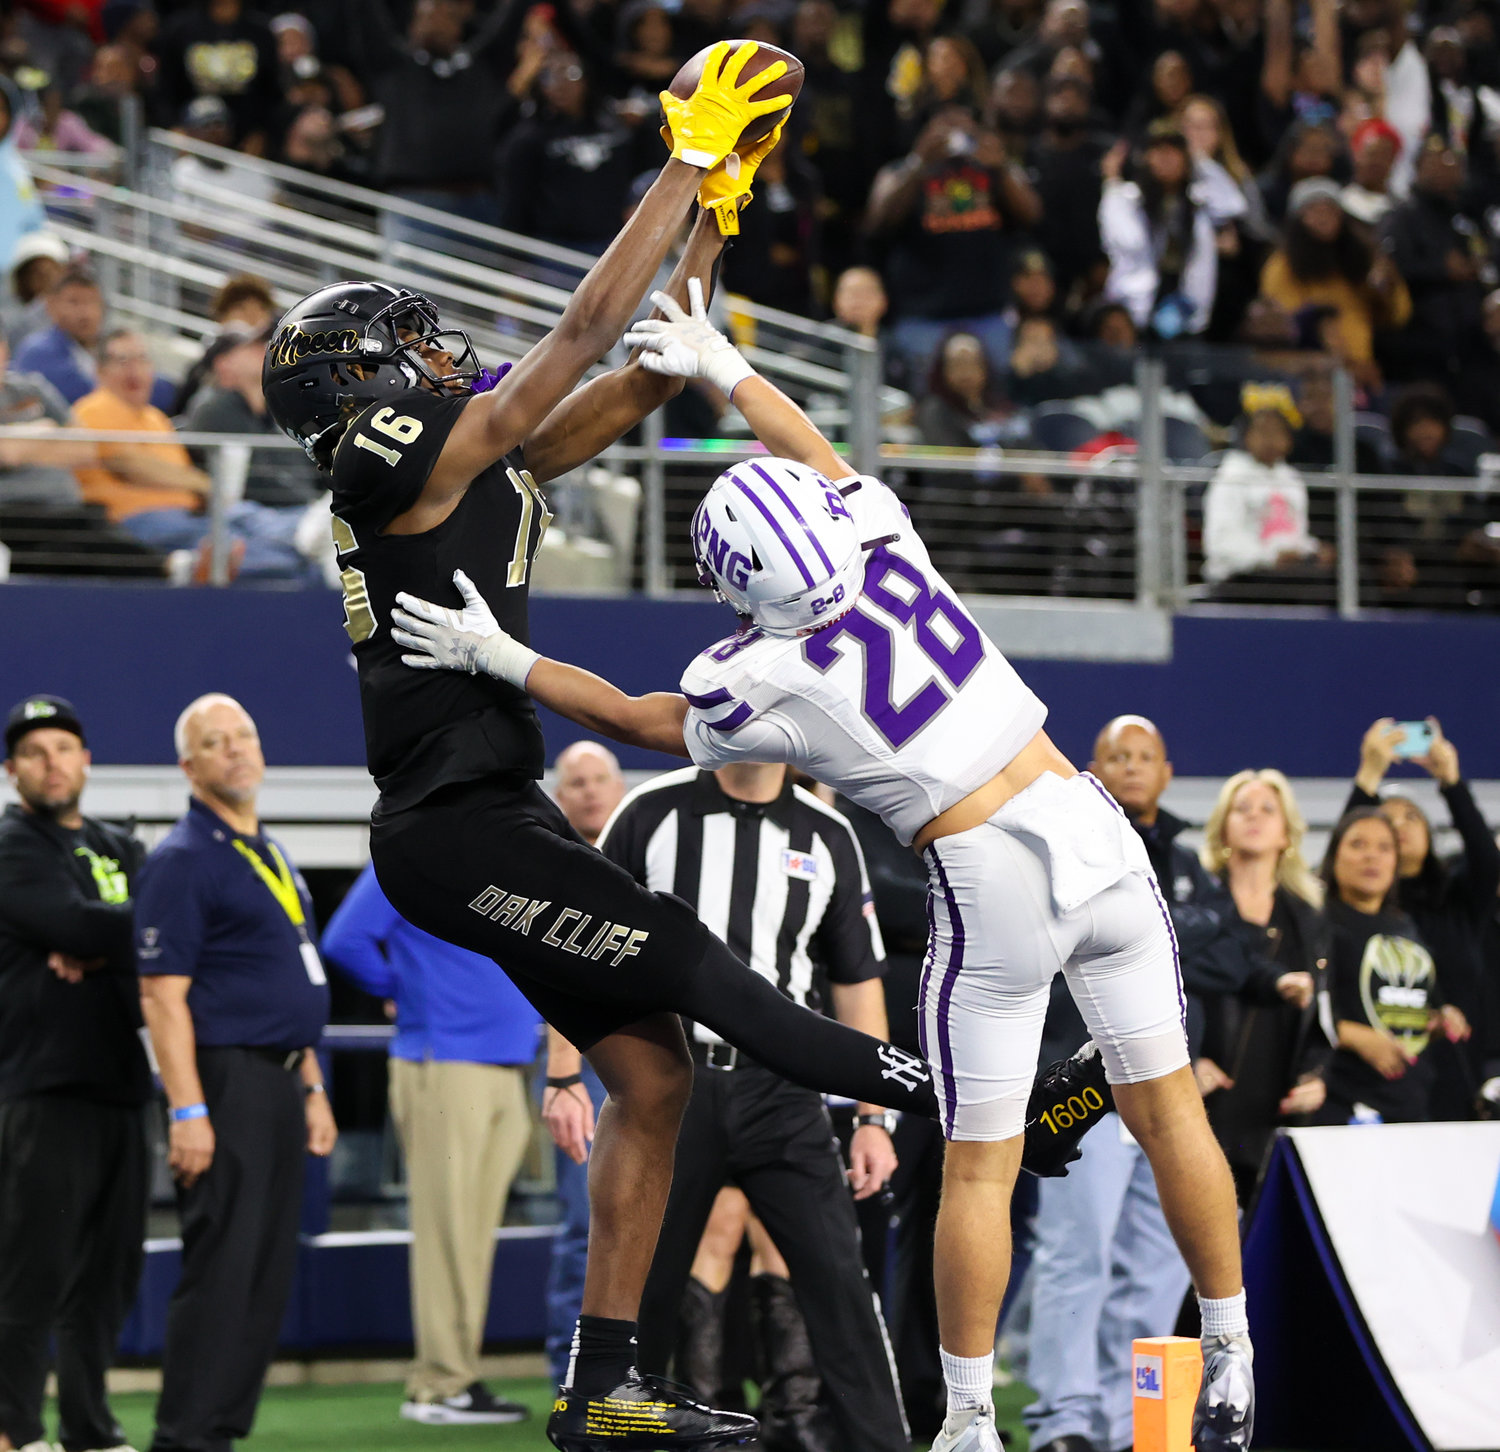 South Oak Cliff wide receiver Trey Jackson (16) makes a touchdown catch over Port Neches-Groves defensive back Reid Richard (28) during the Class 5A Division II football state championship game between South Oak Cliff and Port Neches-Groves in Arlington, Texas, on Dec. 16, 2022.